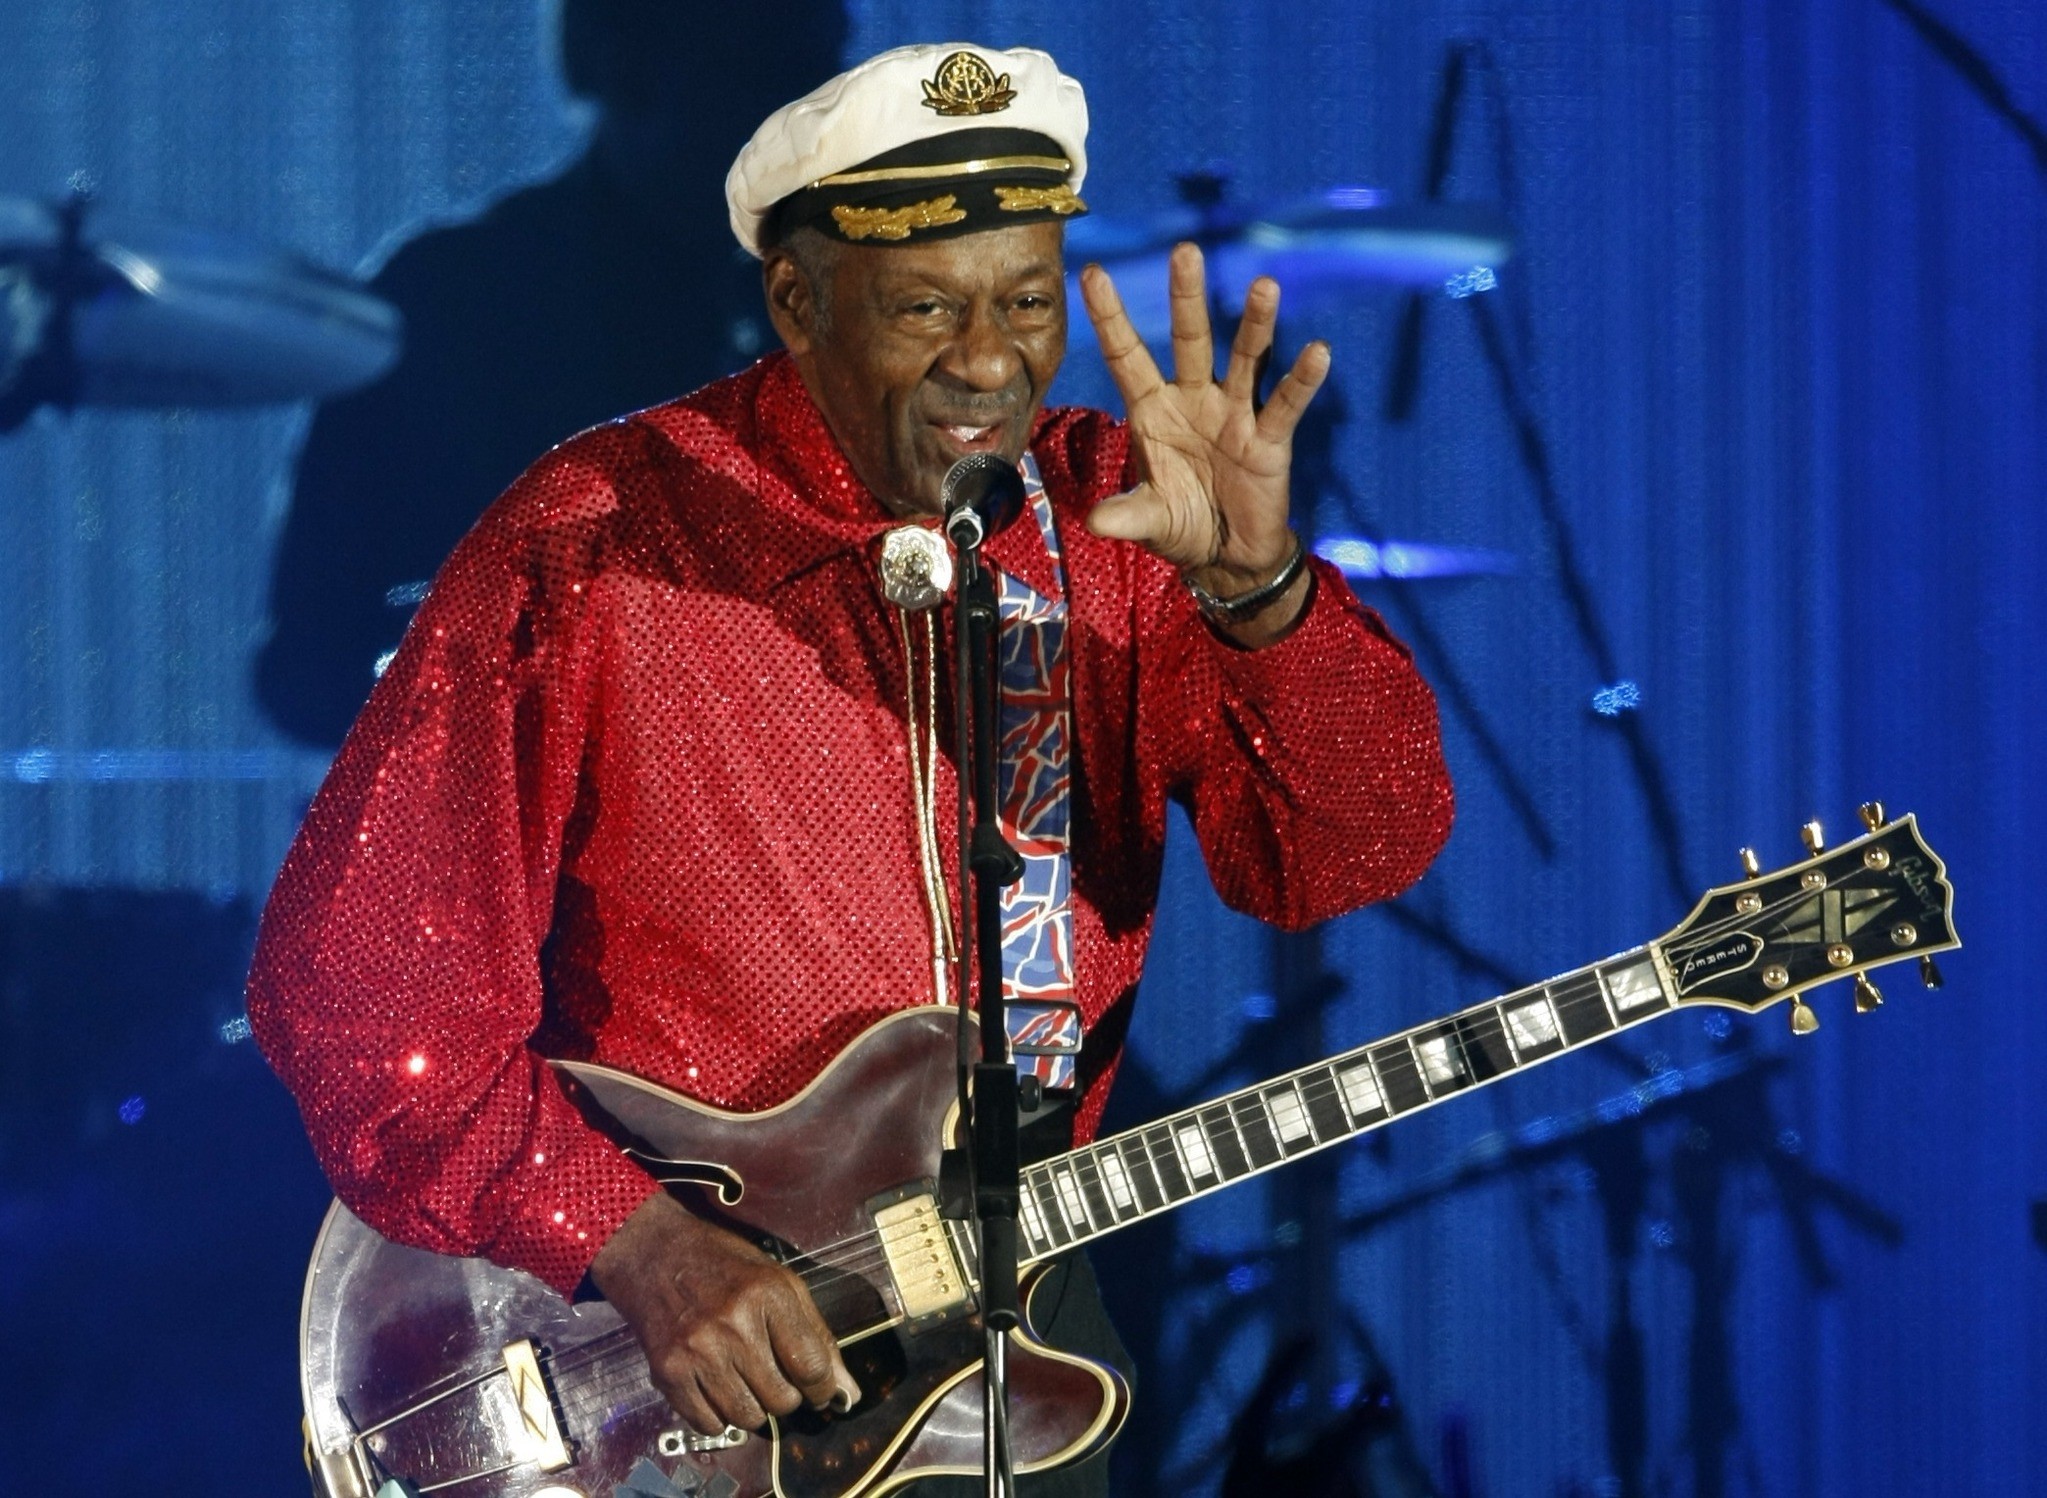 Rock and roll legend Chuck Berry performs during the Bal de la Rose in Monte Carlo, Monaco on March 28, 2009. (REUTERS Photo)